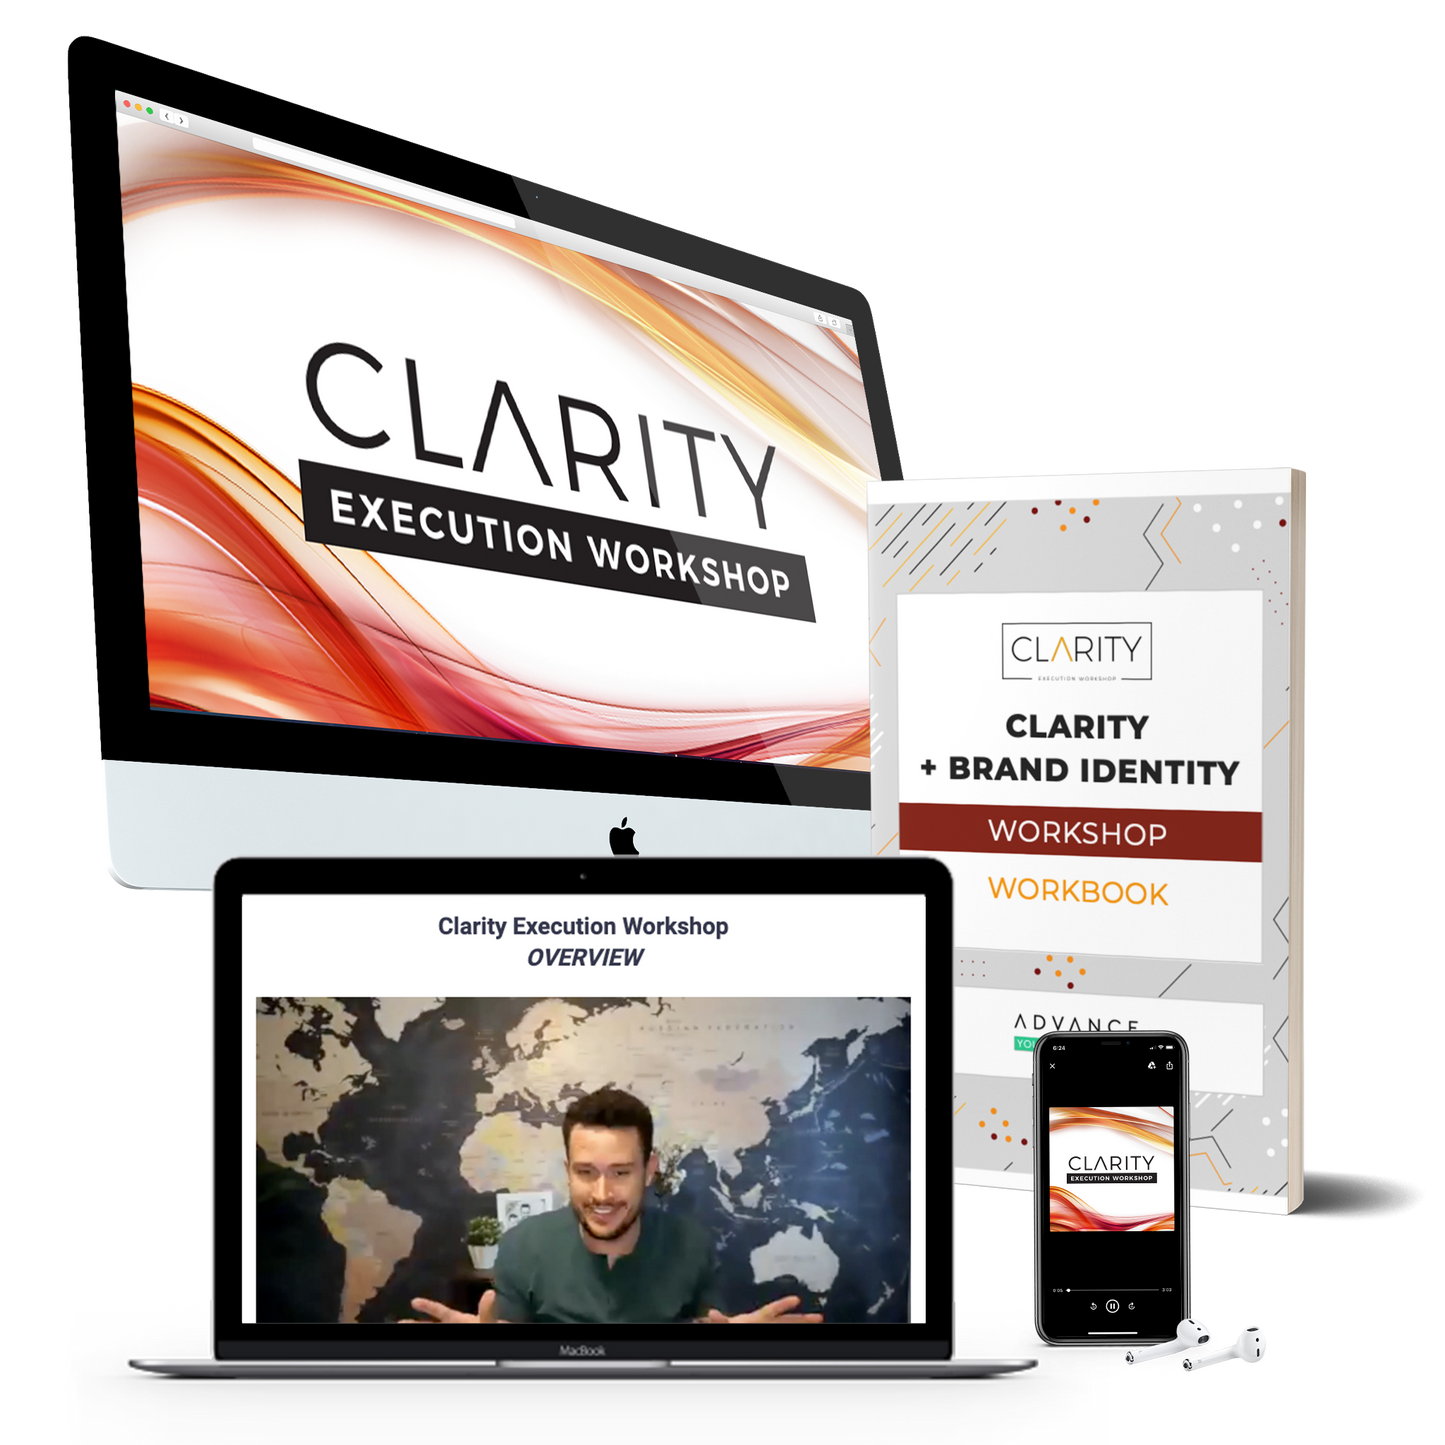 Clarity Execution workshop